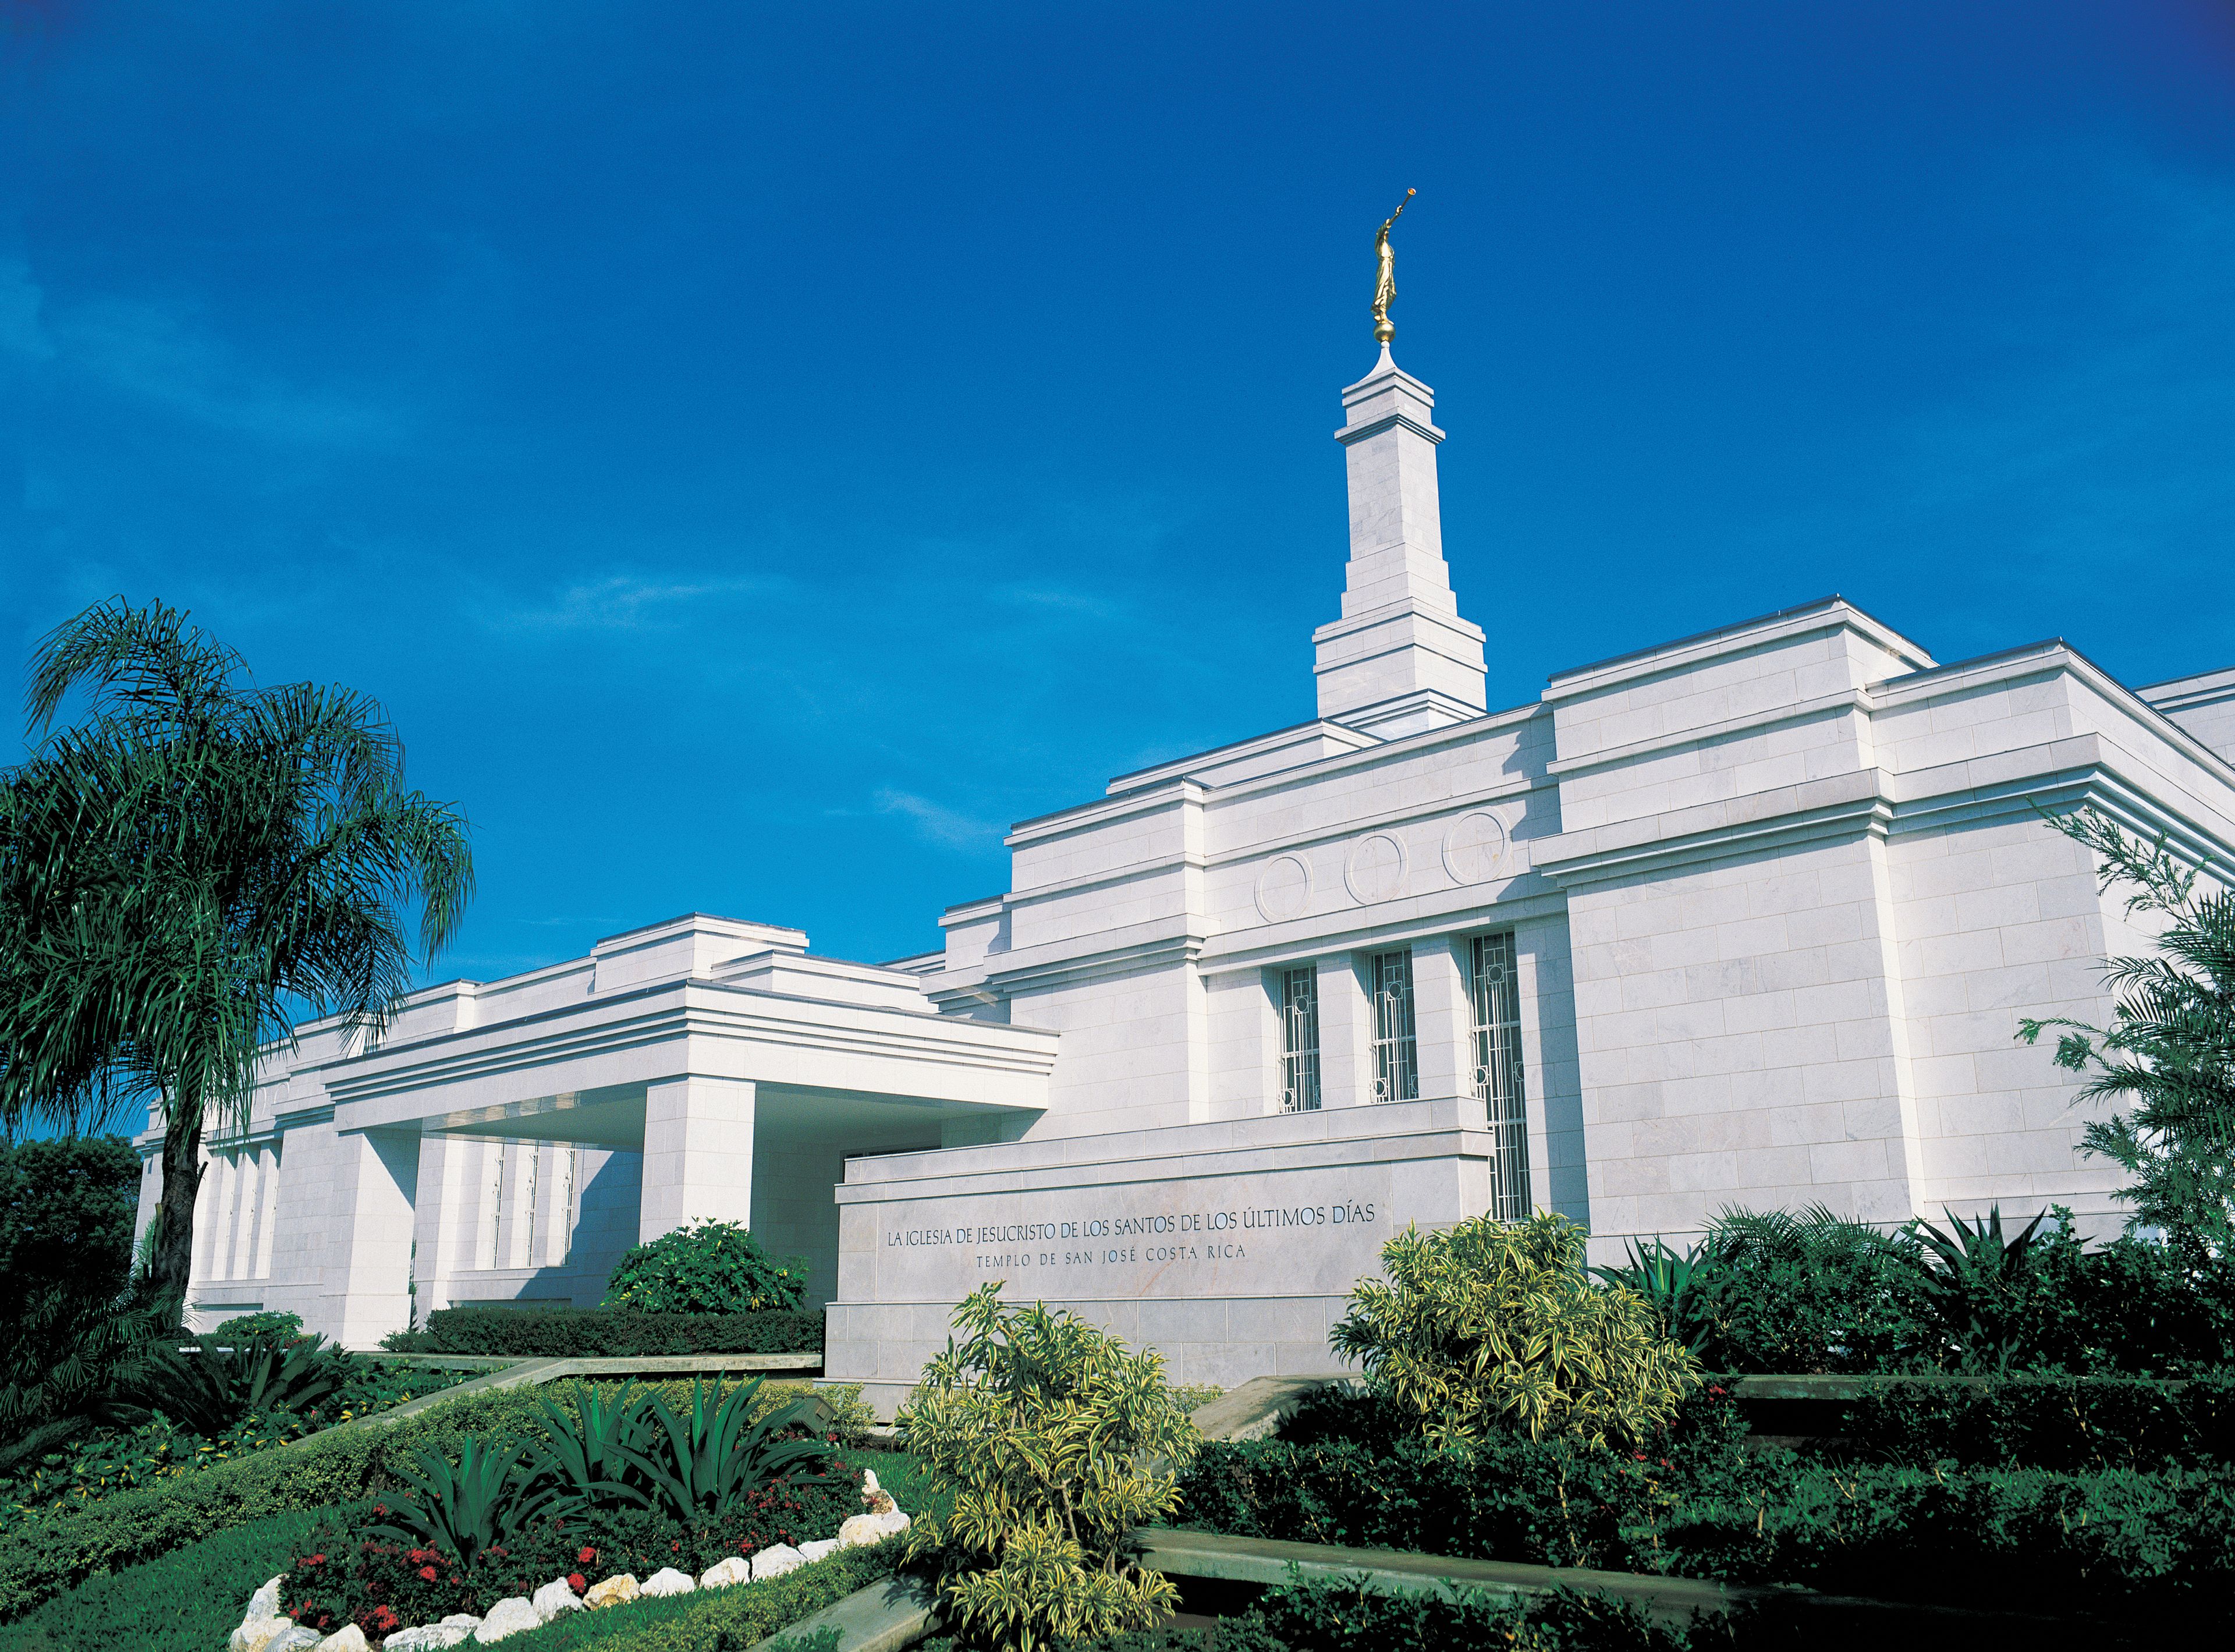 The San José Costa Rica Temple, including the name sign and entrance.